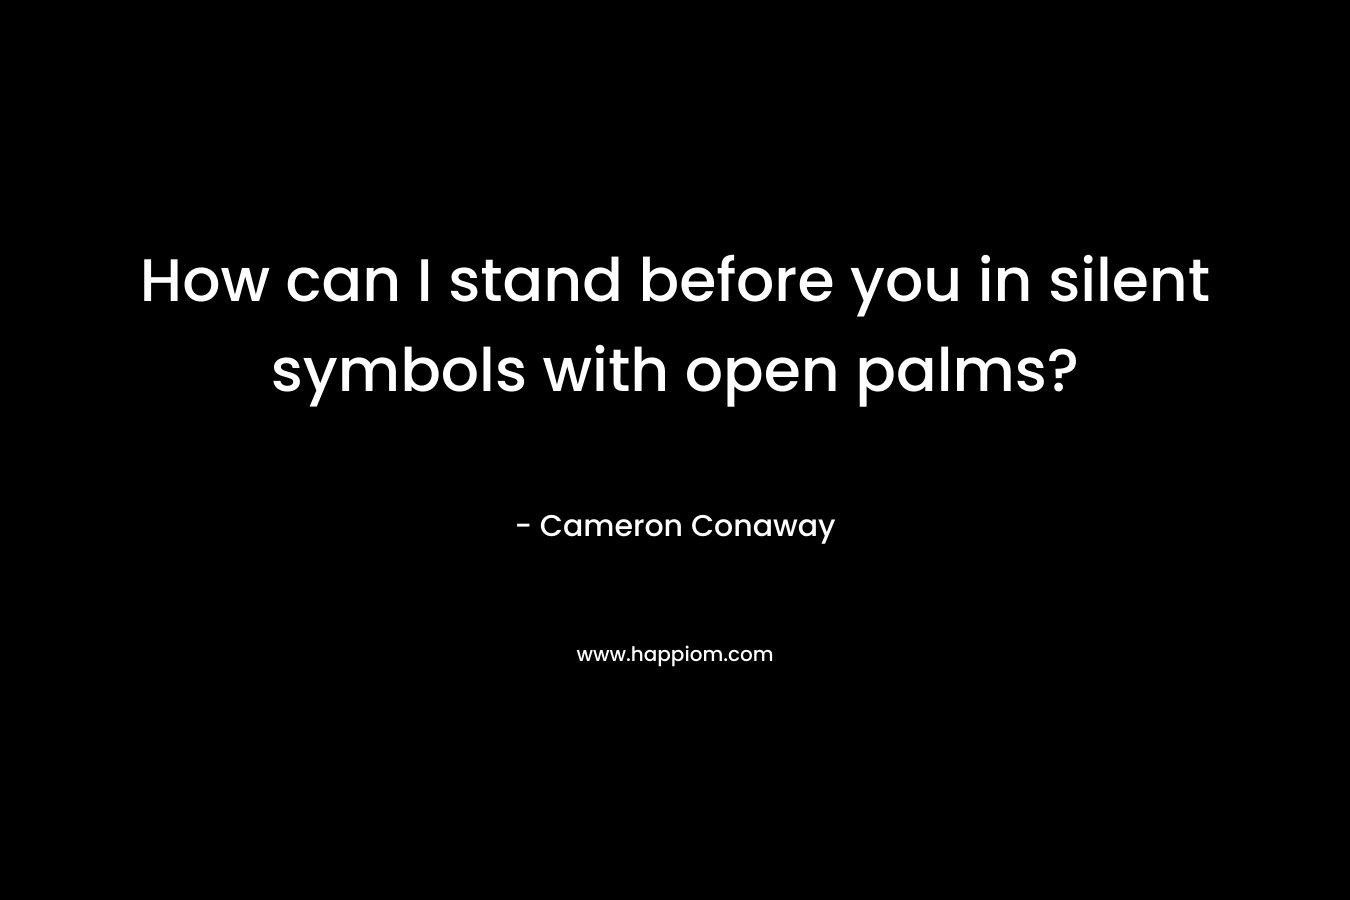 How can I stand before you in silent symbols with open palms?